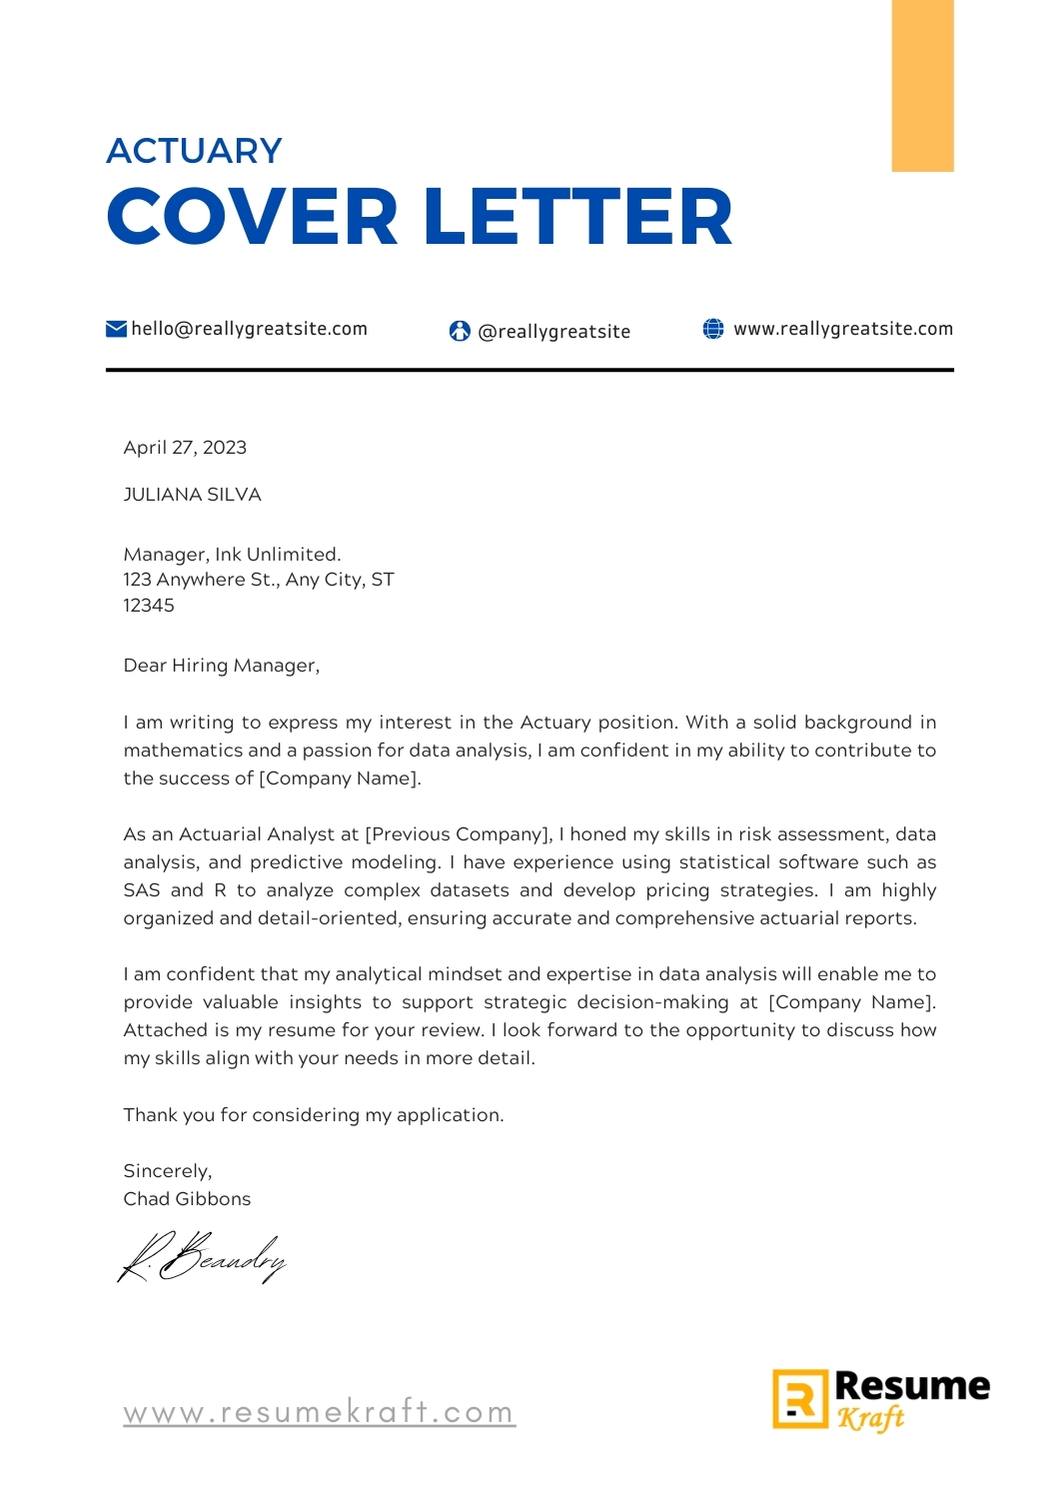 actuary cover letter sample